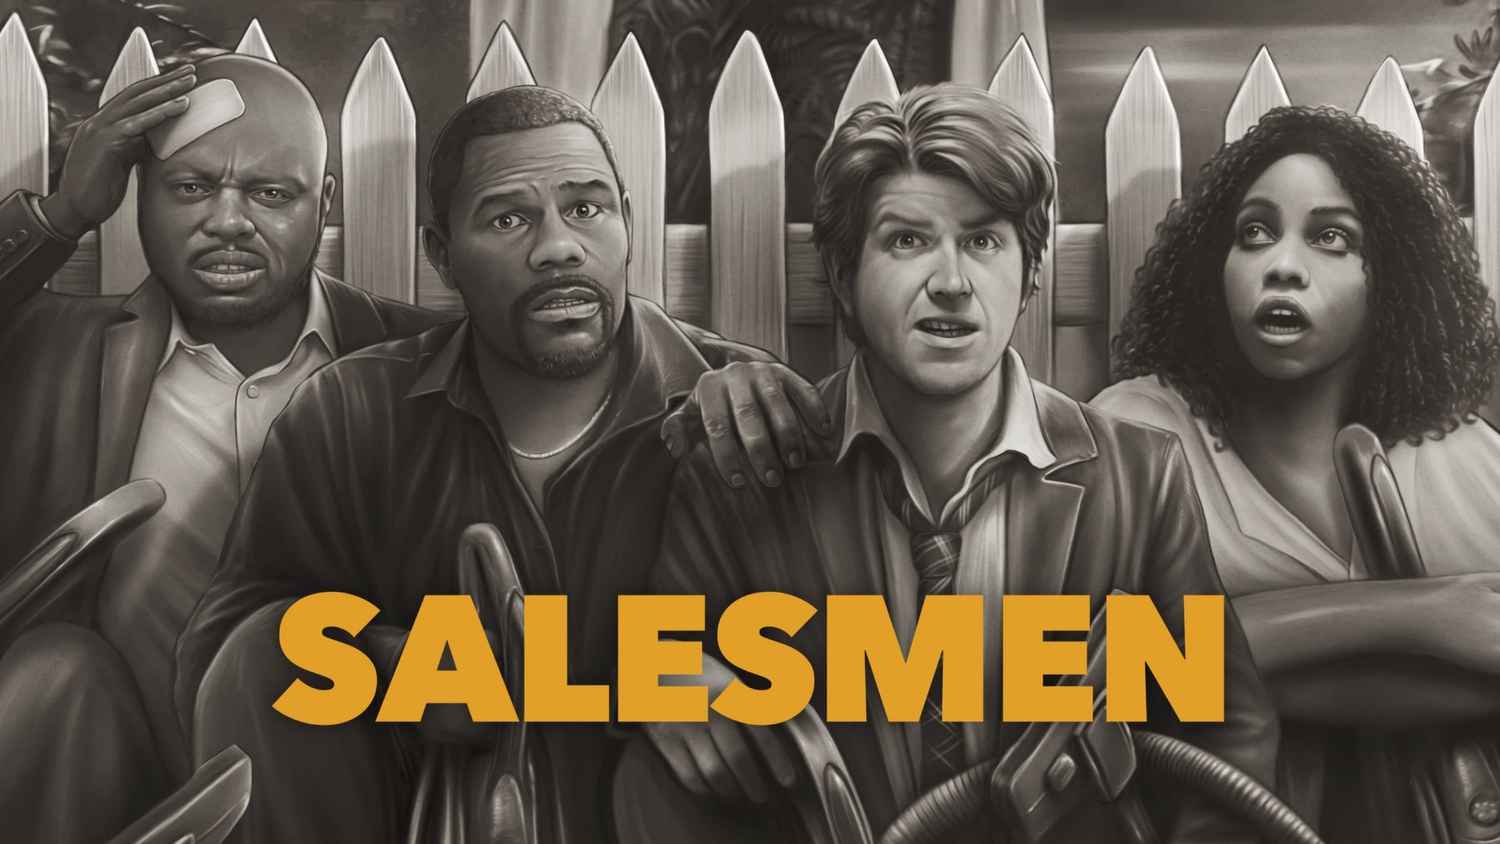 Watch Salesmen Full Movie Online, Release Date, Trailer, Cast and Songs |  Comedy Film